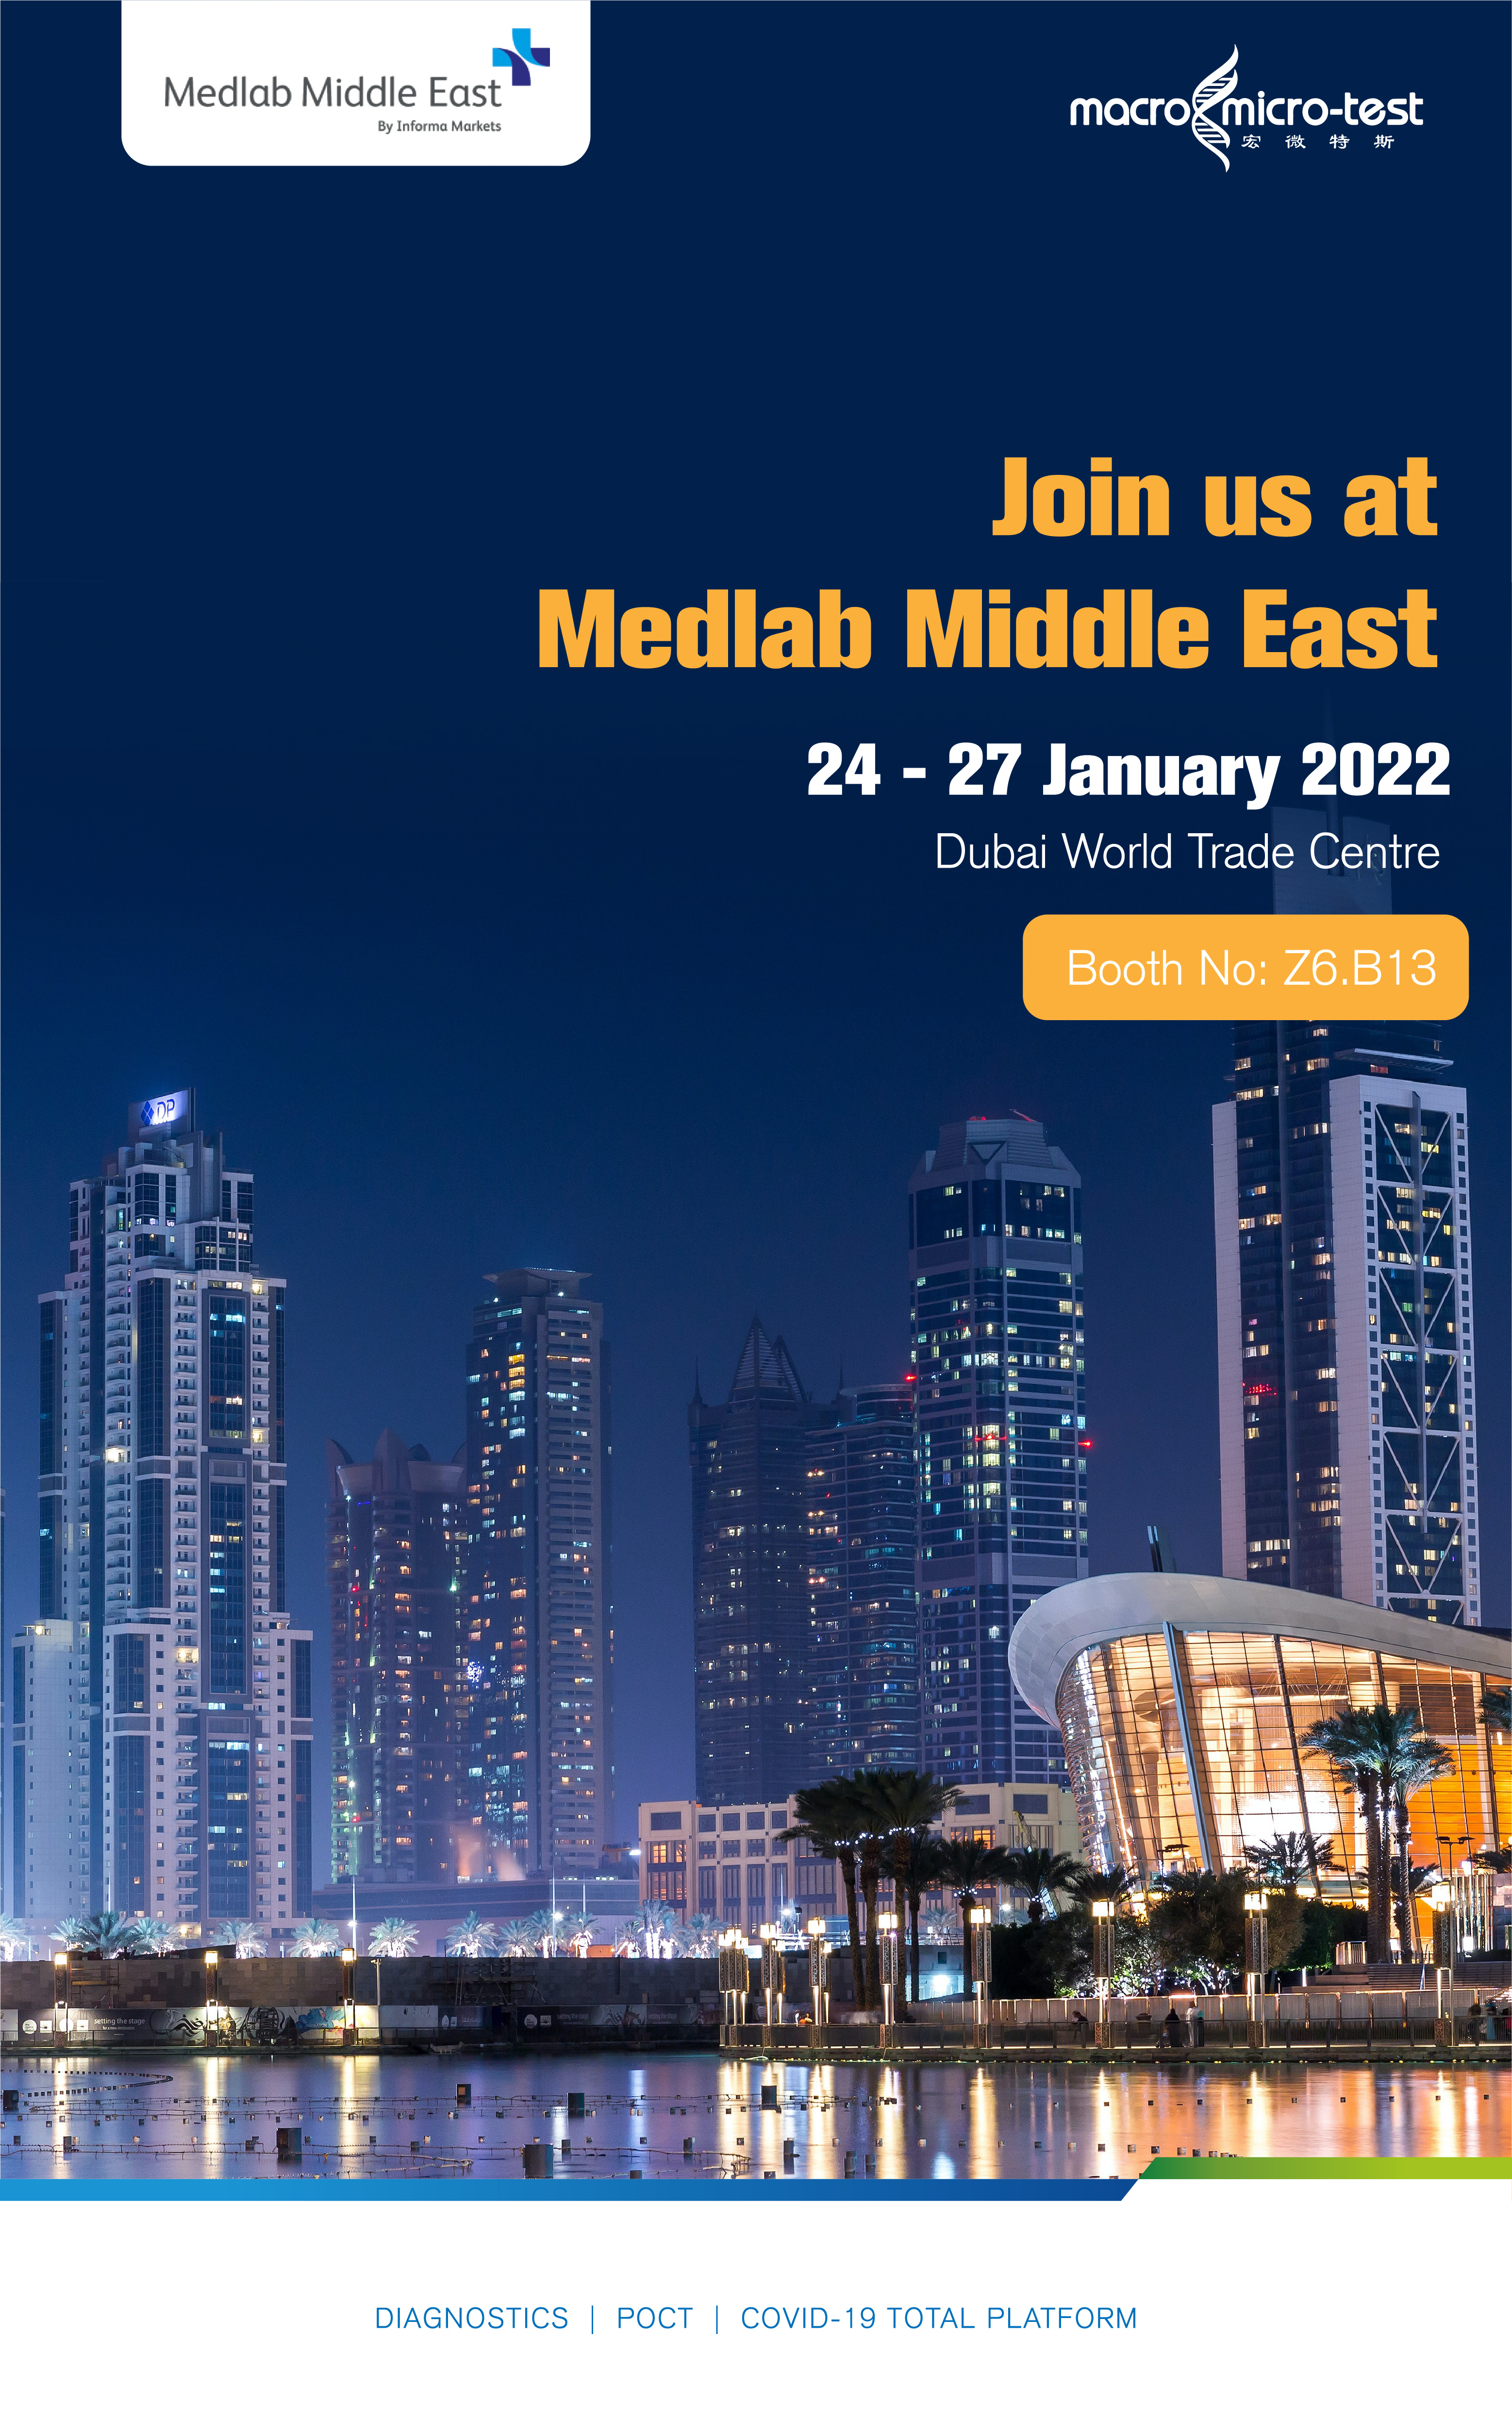 Join us at Medlab Middle East 2022